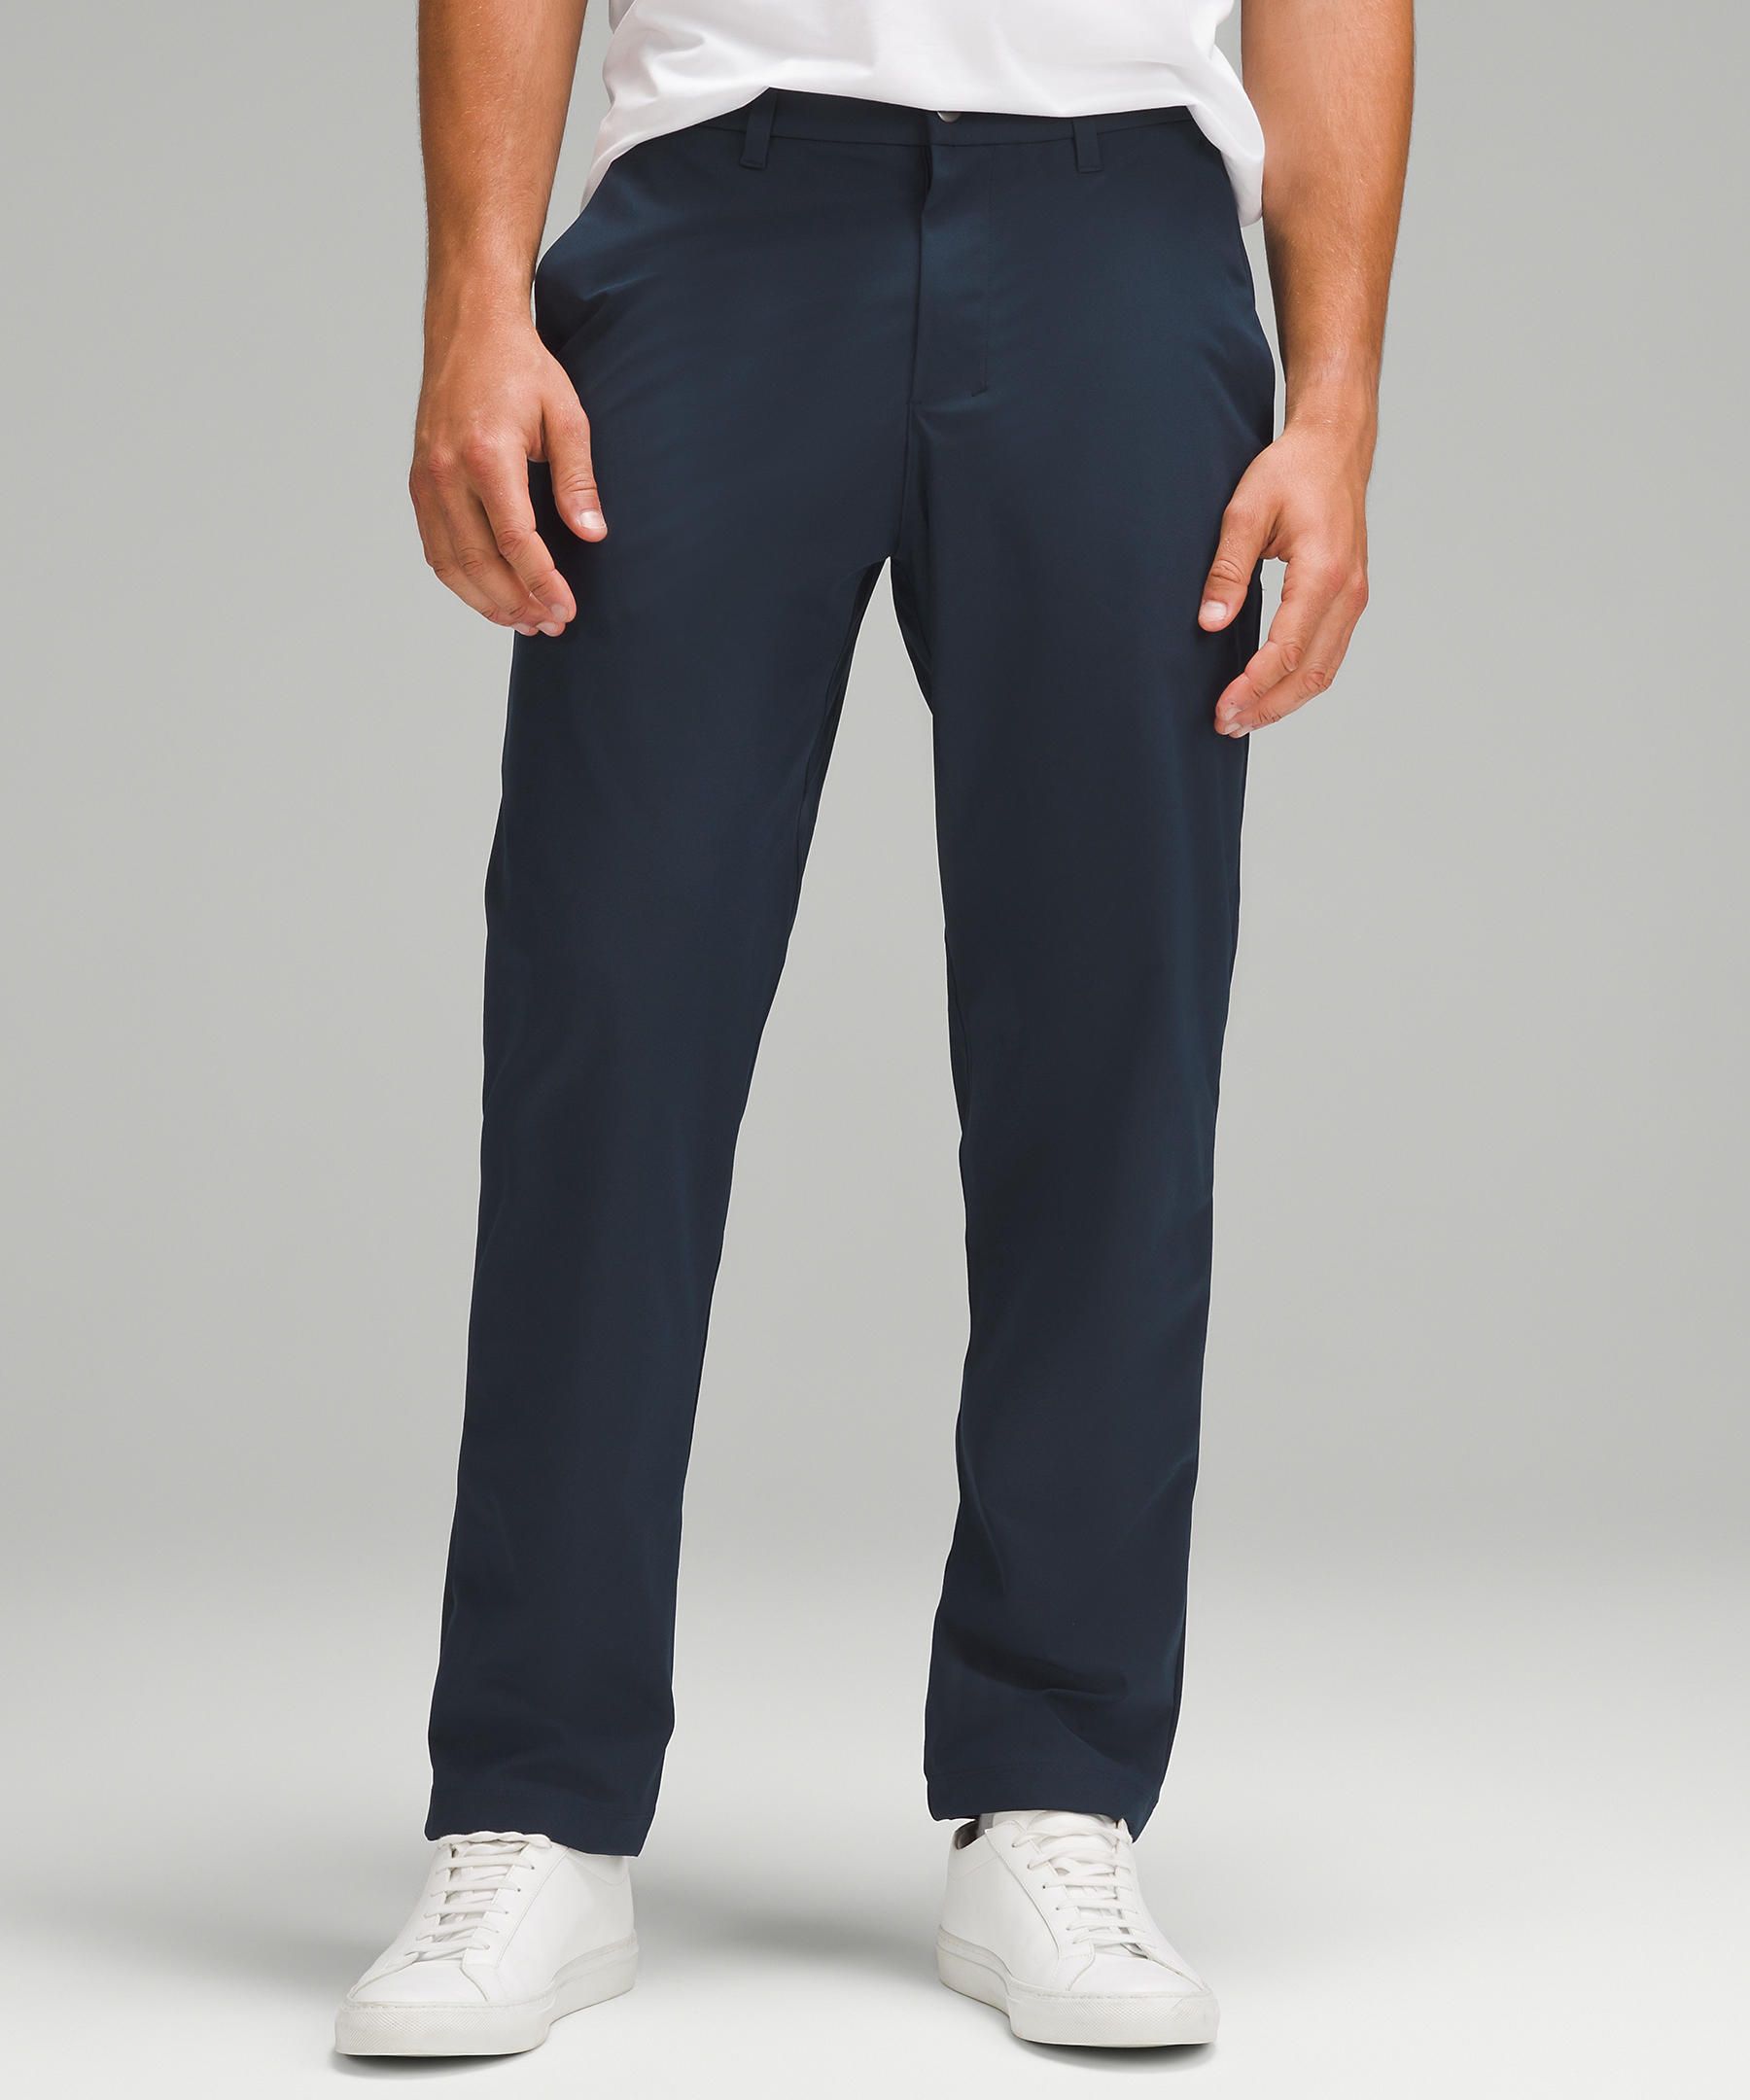 Lululemon Men's Pants Reviews | International Society of Precision  Agriculture